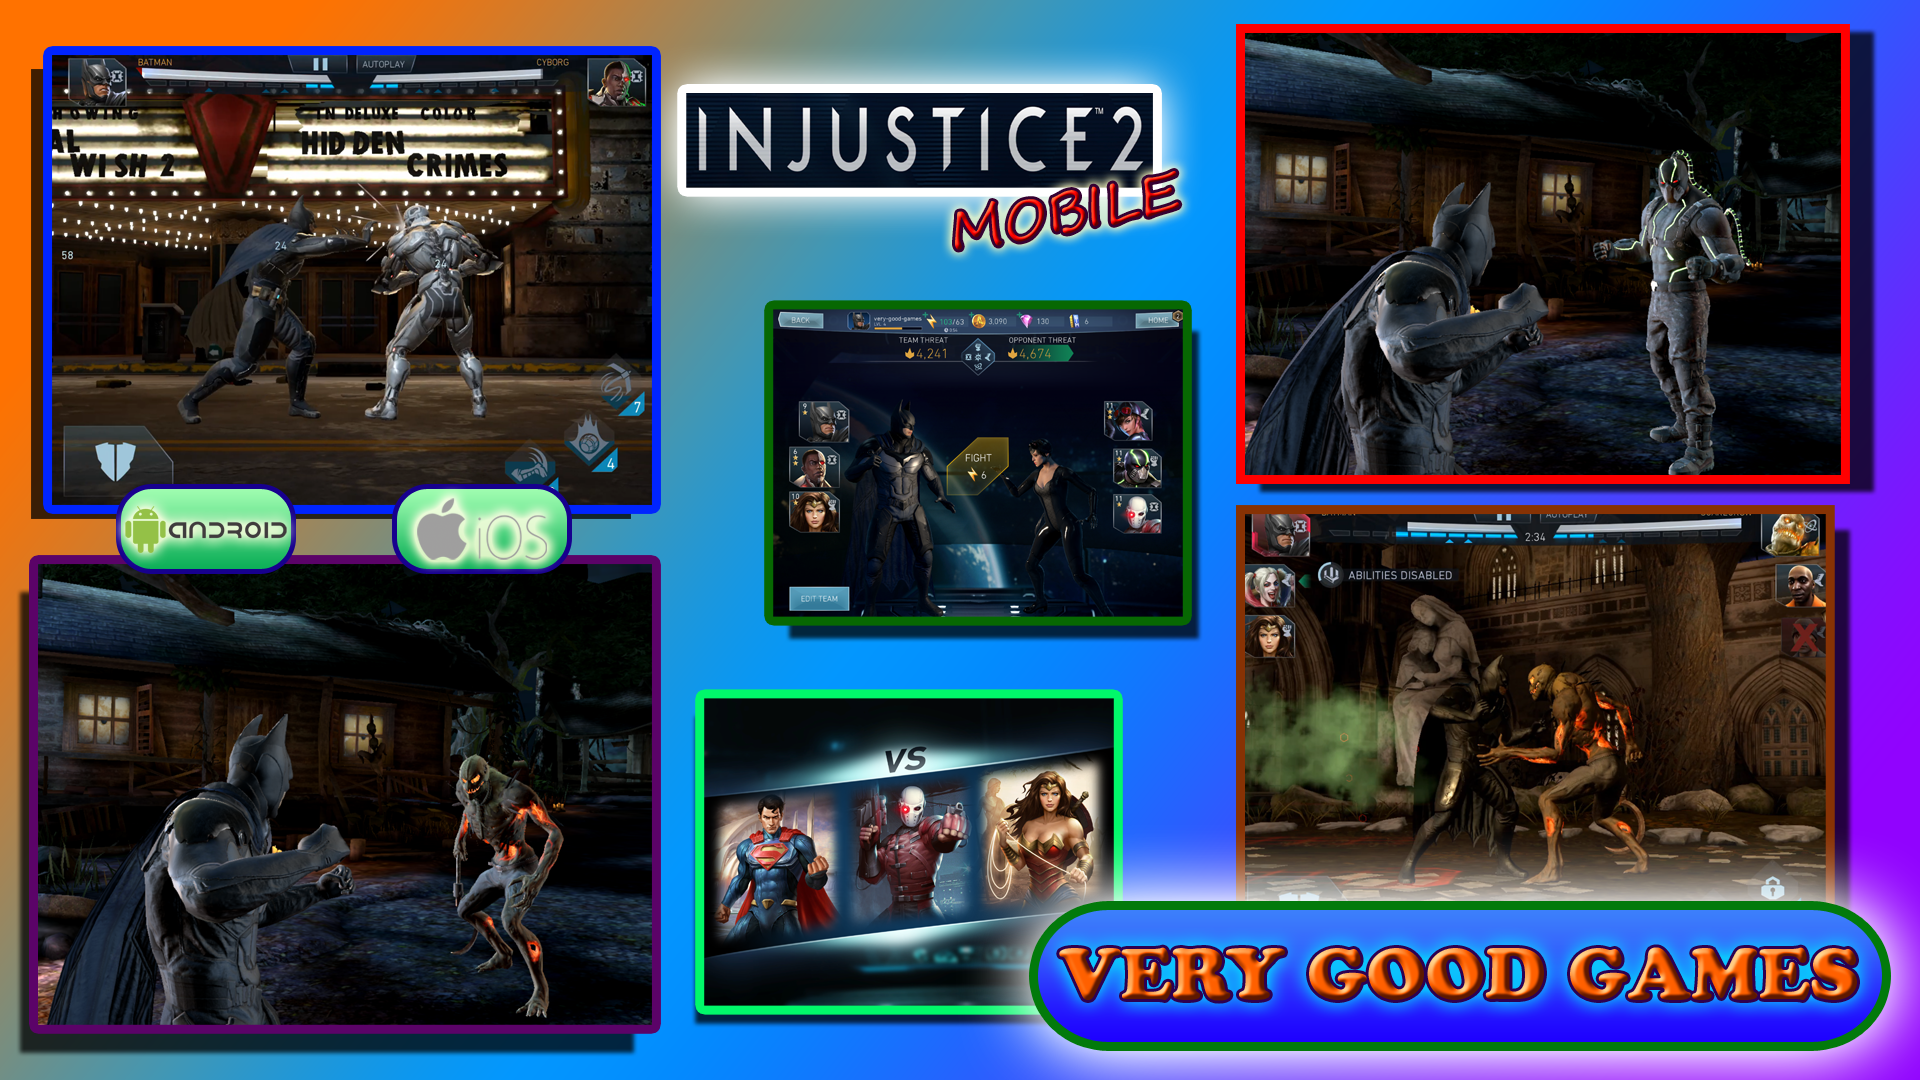 Screenshots from Injustice 2 Mobile - a free fighting game for tablets and smartphones